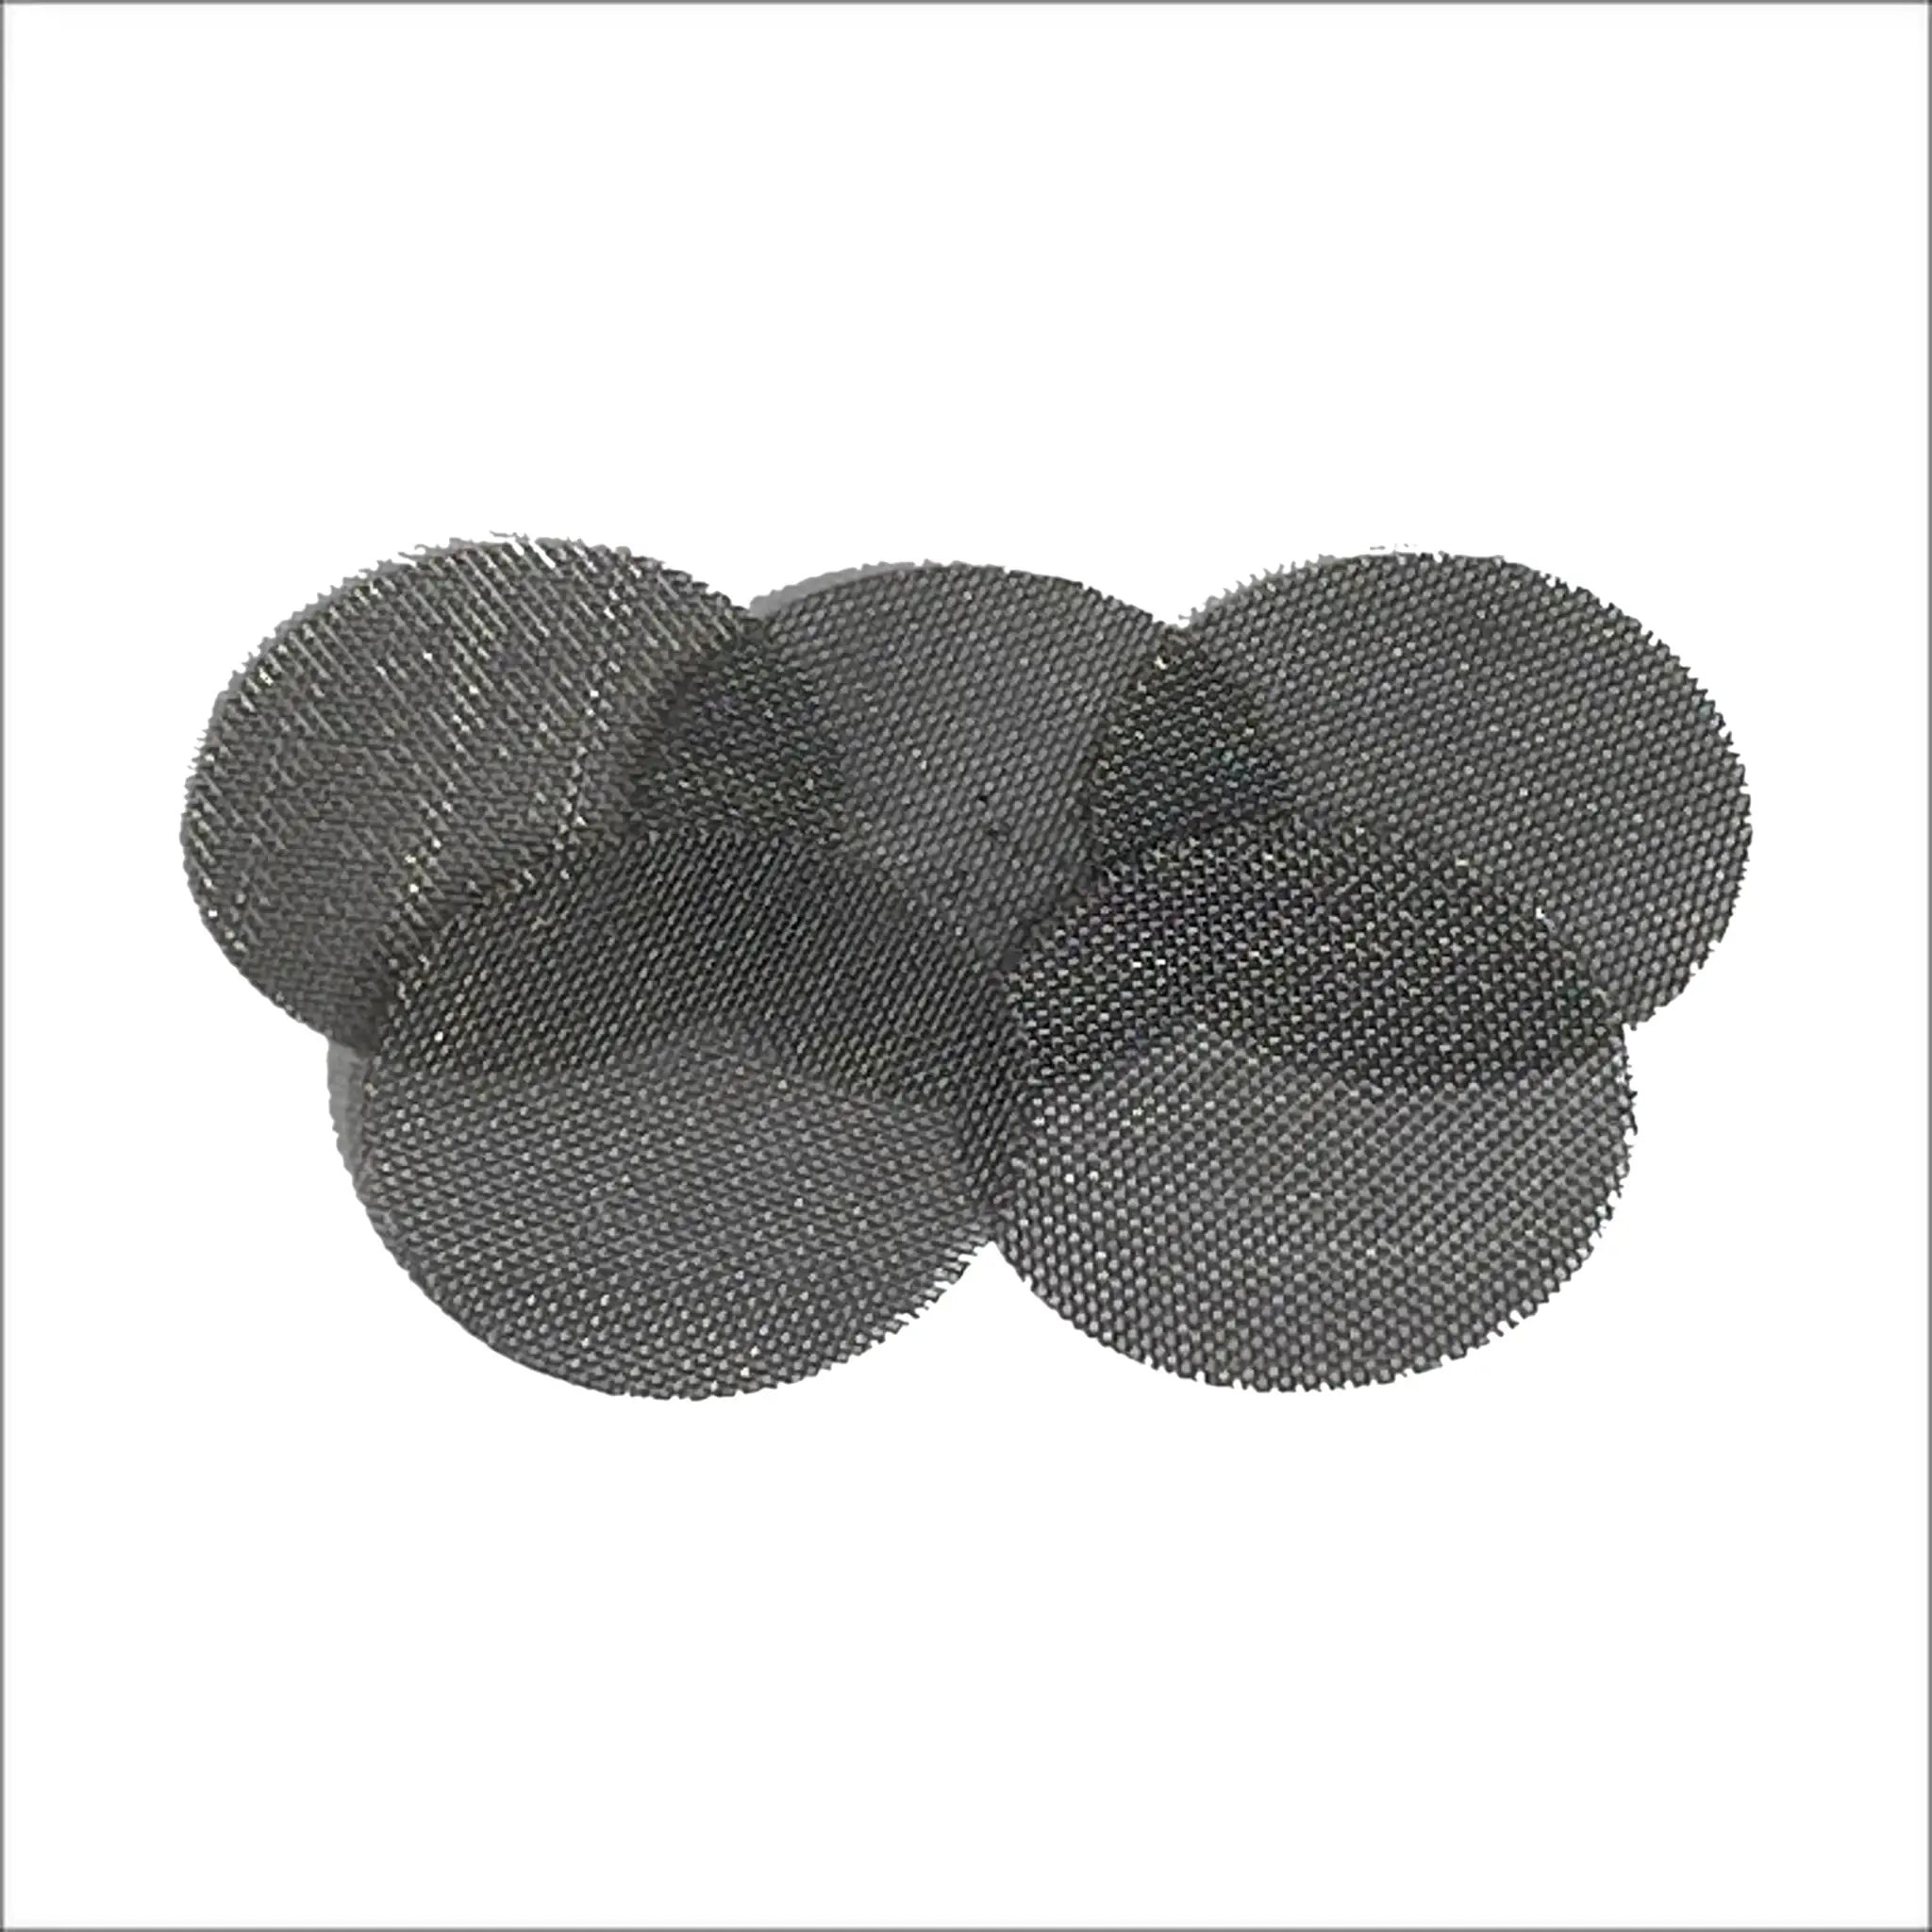 Cocktail Smoker Smoke Chamber Replacement Mesh Discs - Blind Pig Drinking Co.